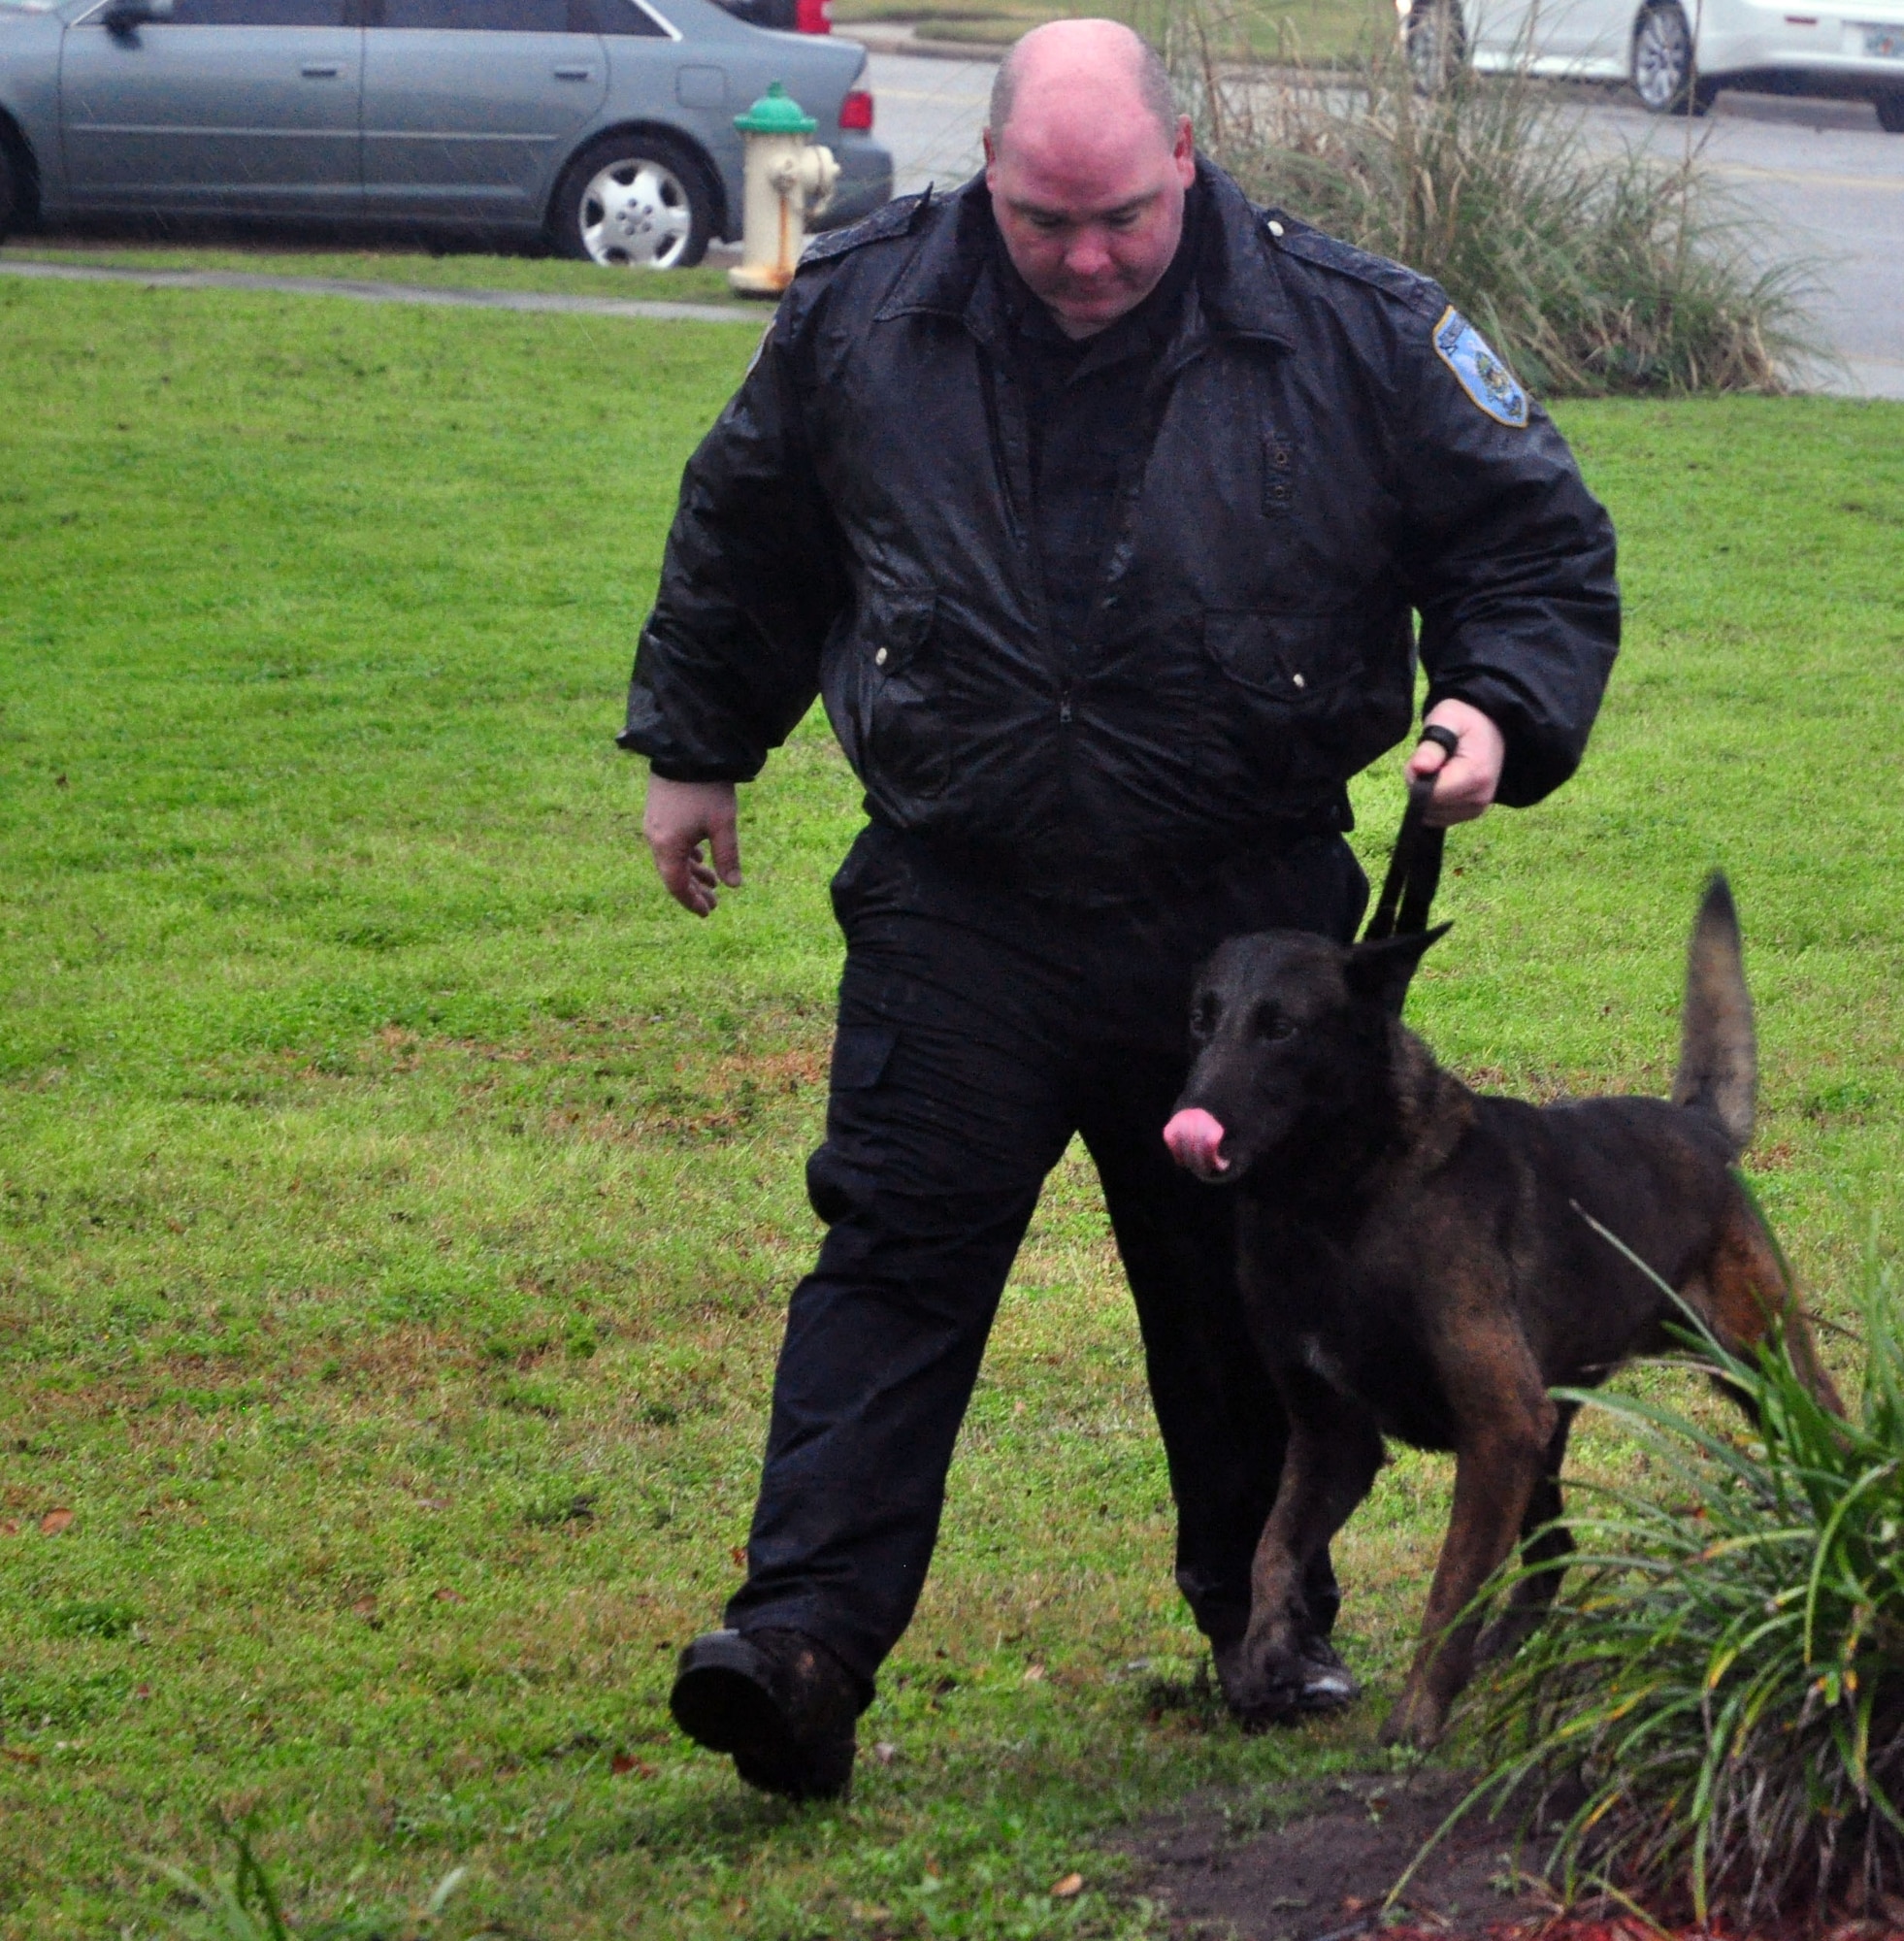 Jason F. Gleason, Panama City Beach Police Department corporal, leads Argo, his canine companion, into the Tyndall base chapel Feb. 7 as part of a narcotics working dog seminar attended by local and base authorities. (U.S. Air Force photo by Airman 1st Class Alex Echols)